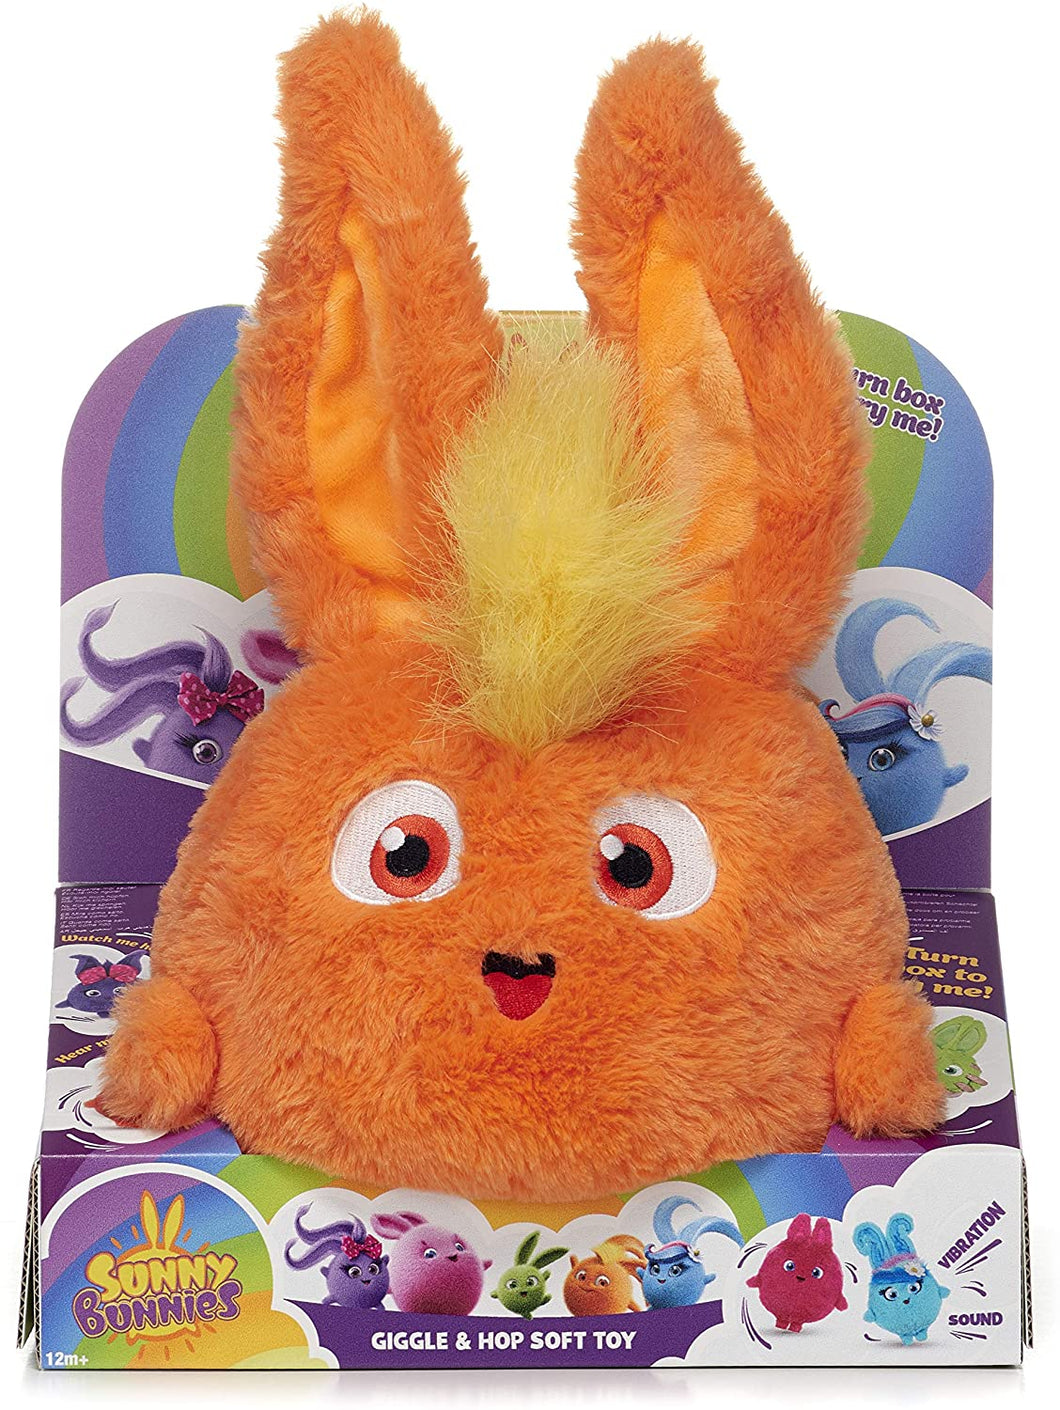 Posh Paws 37428 Sunny Bunnies Large Feature Turbo Giggle & Hop Soft Toy-28cm (11 inch)